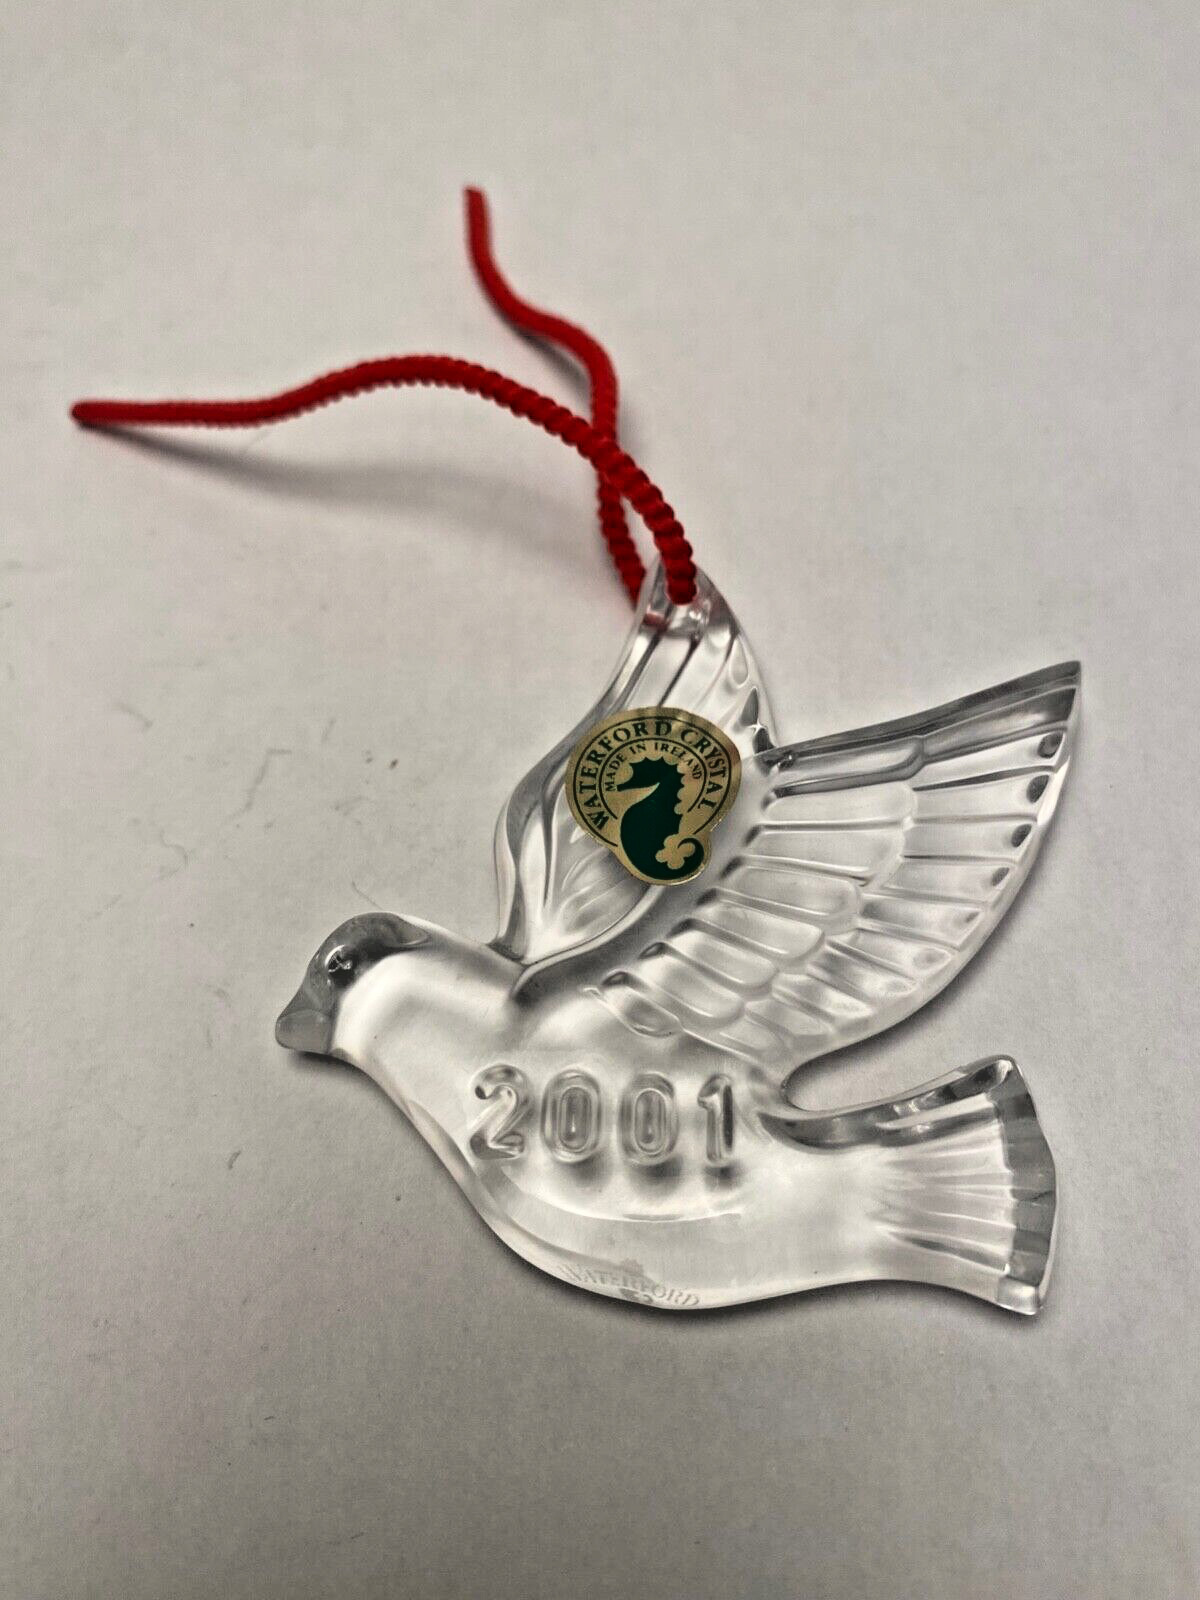 2001 Waterford Crystal Memories Collection Dove Christmas Ornament